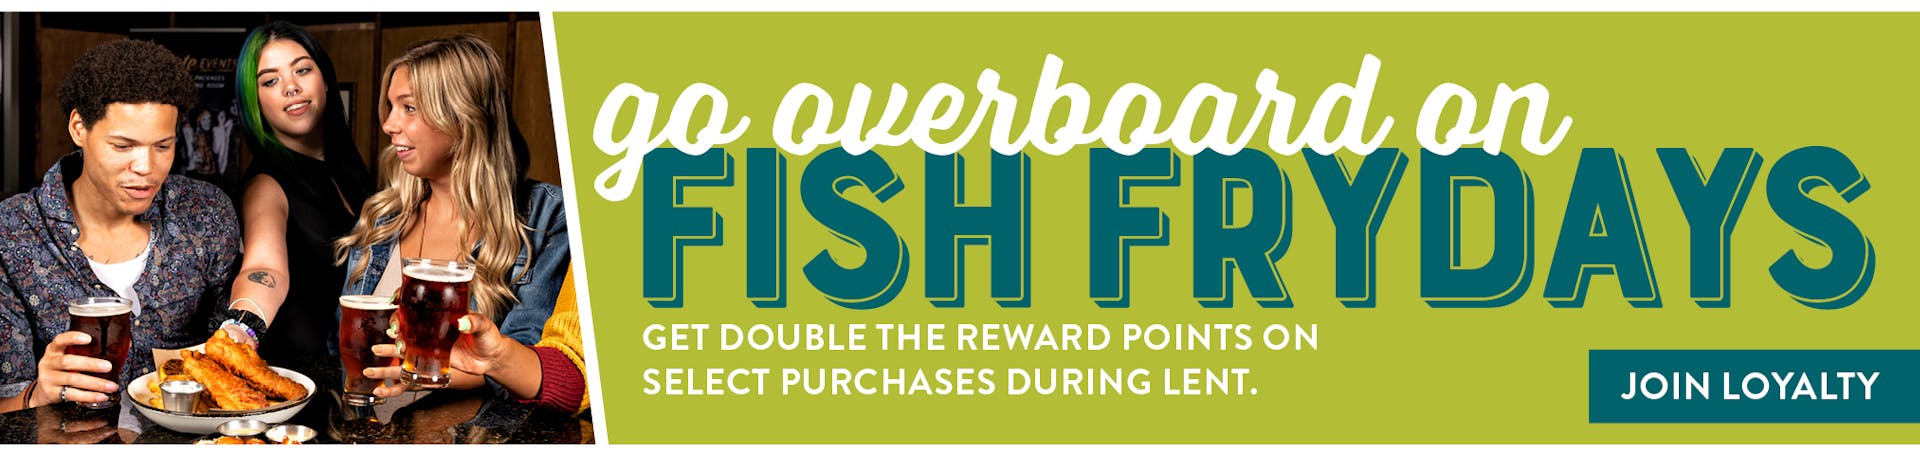 Image of a server placing a dish on the table for a couple of people sitting at a table having a few beers. Go overboard on Fish Fridays. Get Double the reward points on select purchases during lent. Join Loyalty